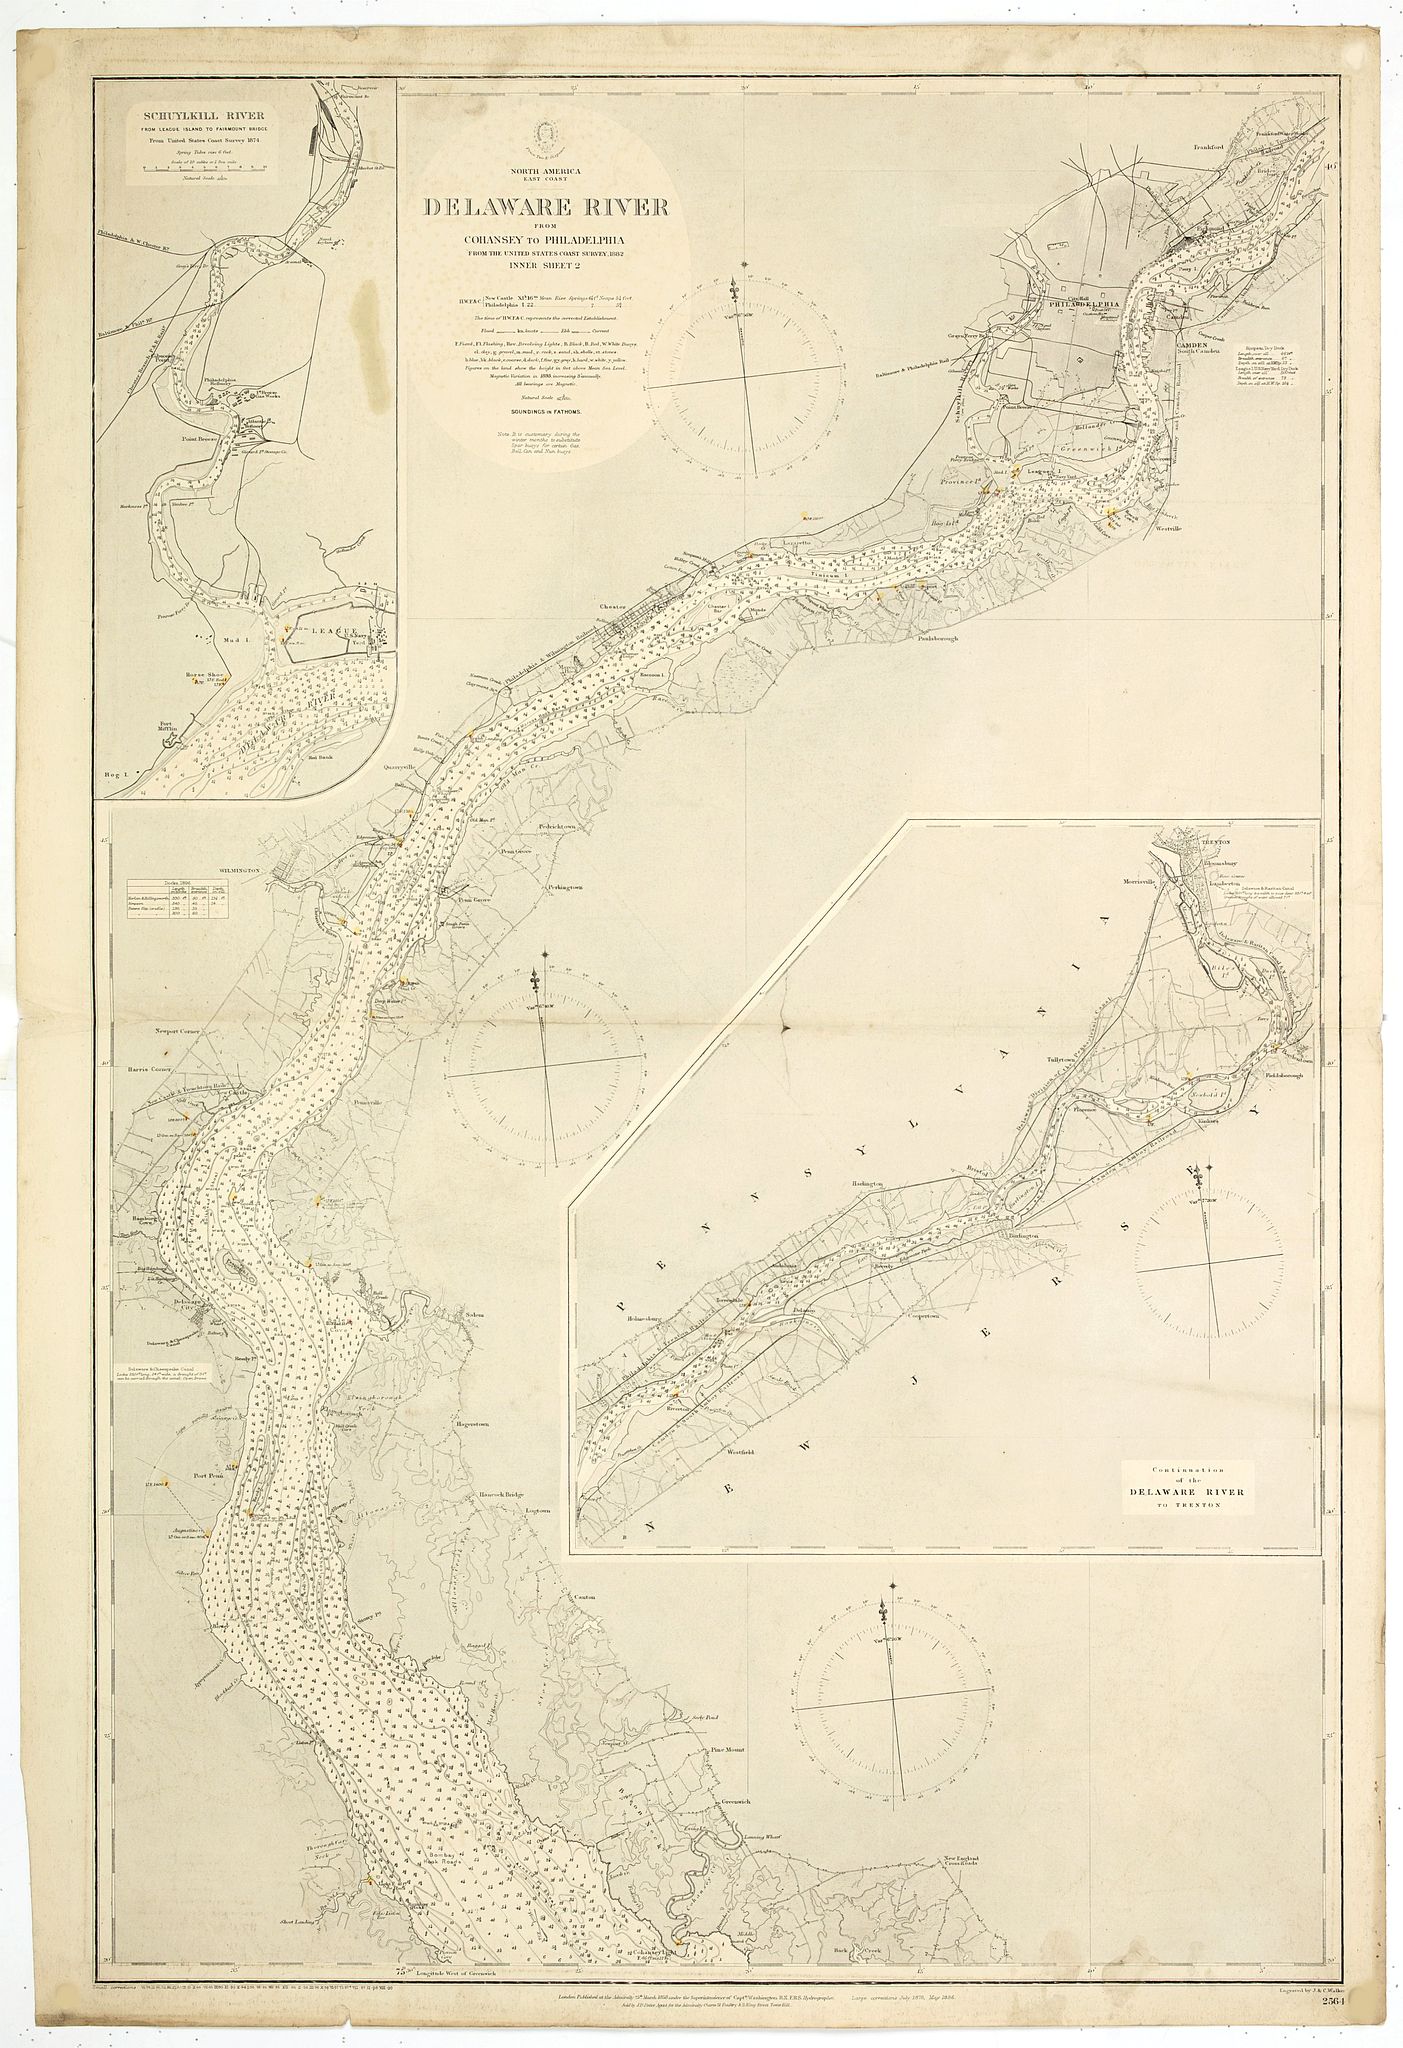 Delaware River from Cohansey to Philadelphia. From the United States Coast Survey, 1882. Inner sheet 2.